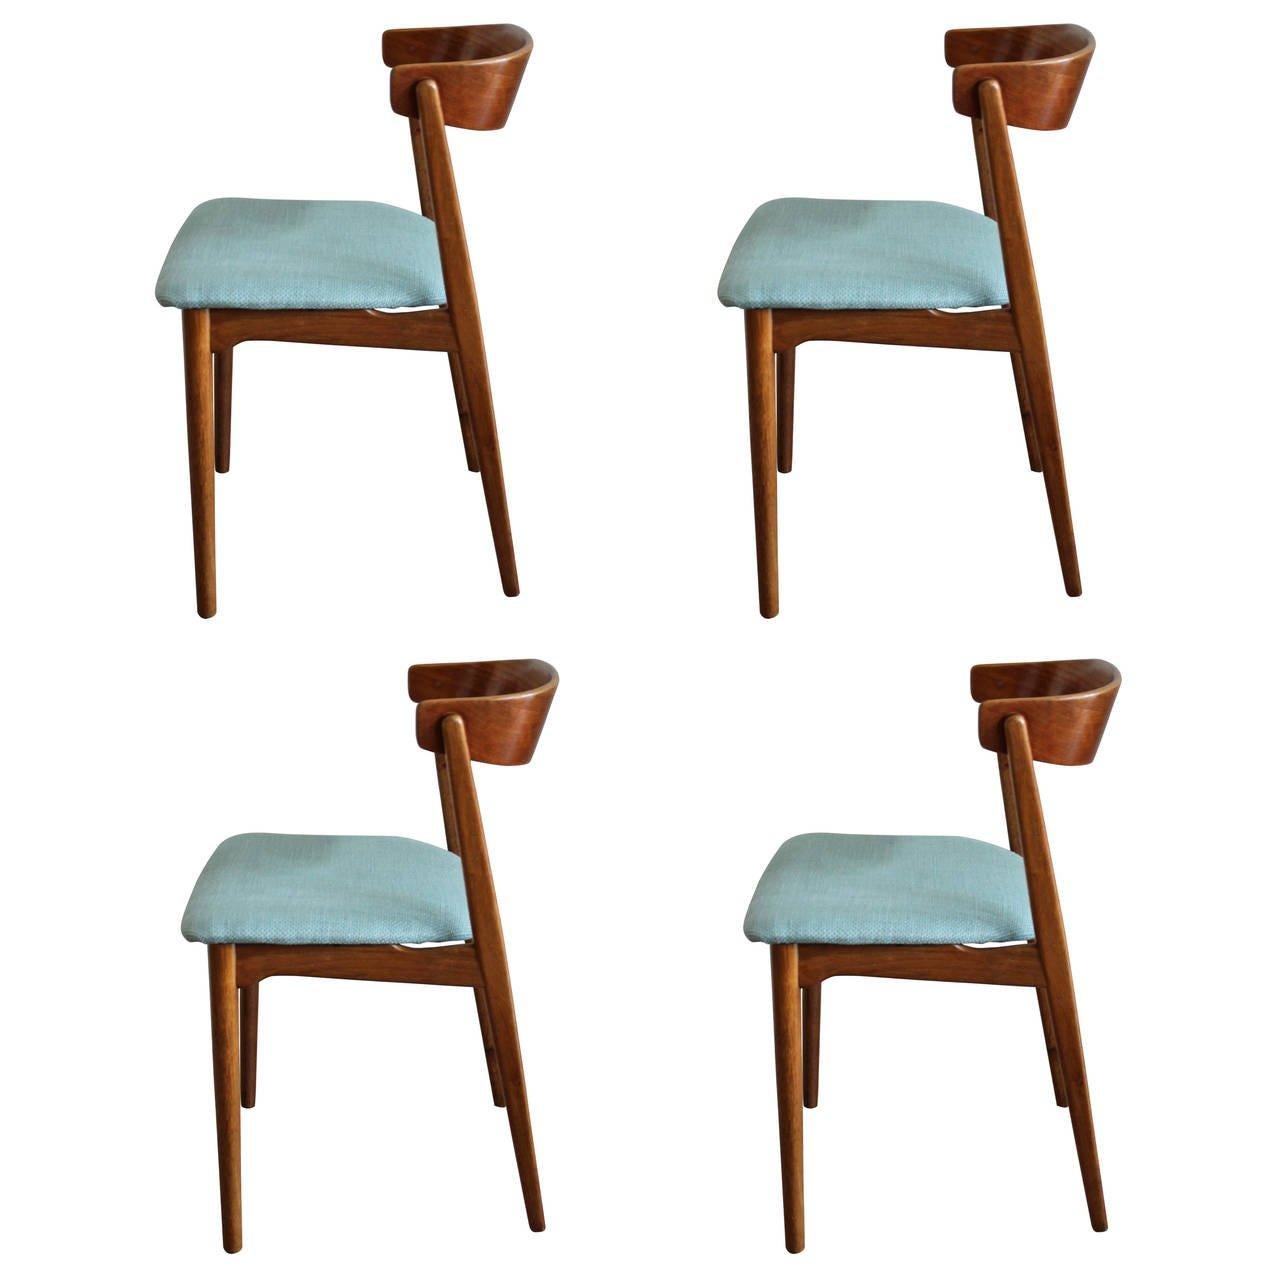 Set of Four Mid-Century Modern Teak Chairs In Good Condition For Sale In San Antonio, TX